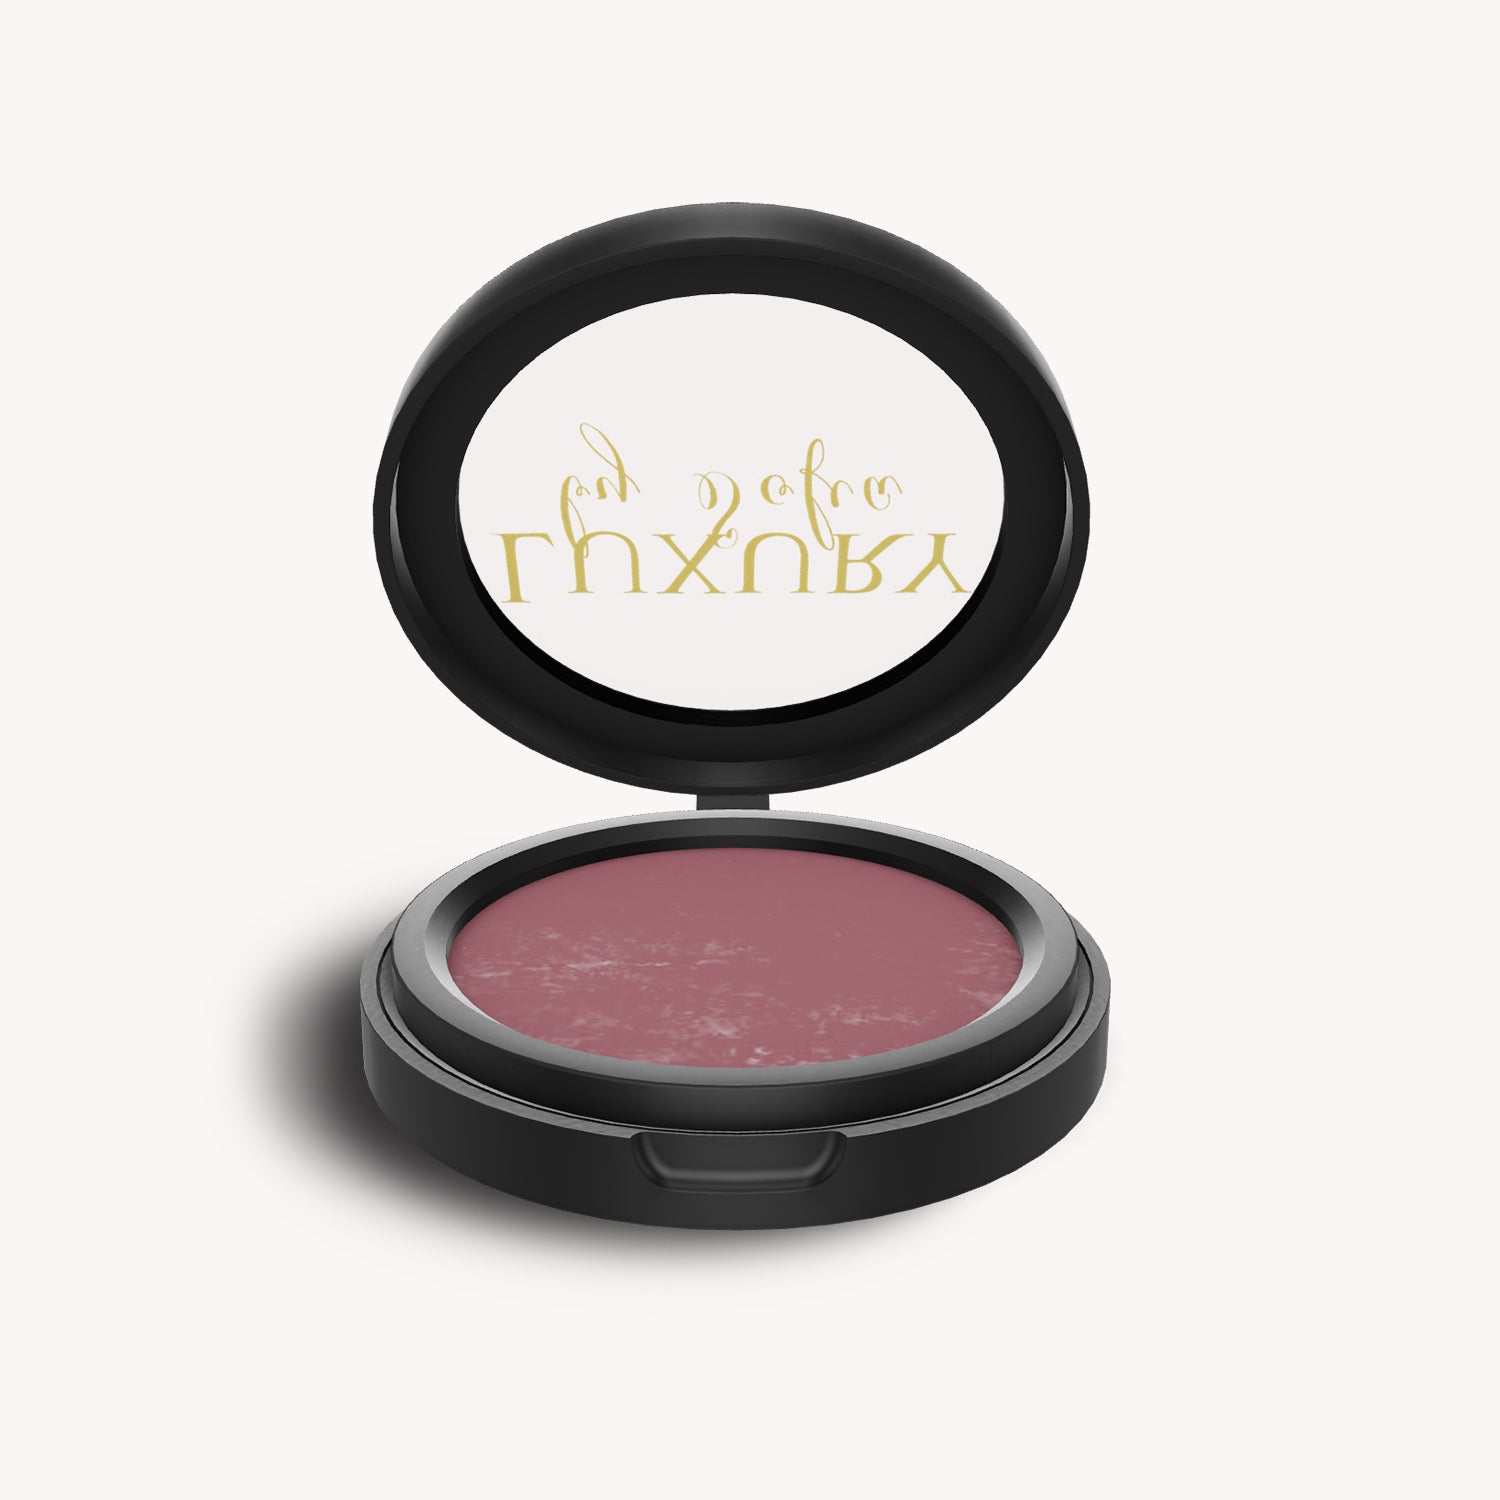 All-Natural Cream Blush for a Fresh, Radiant Look